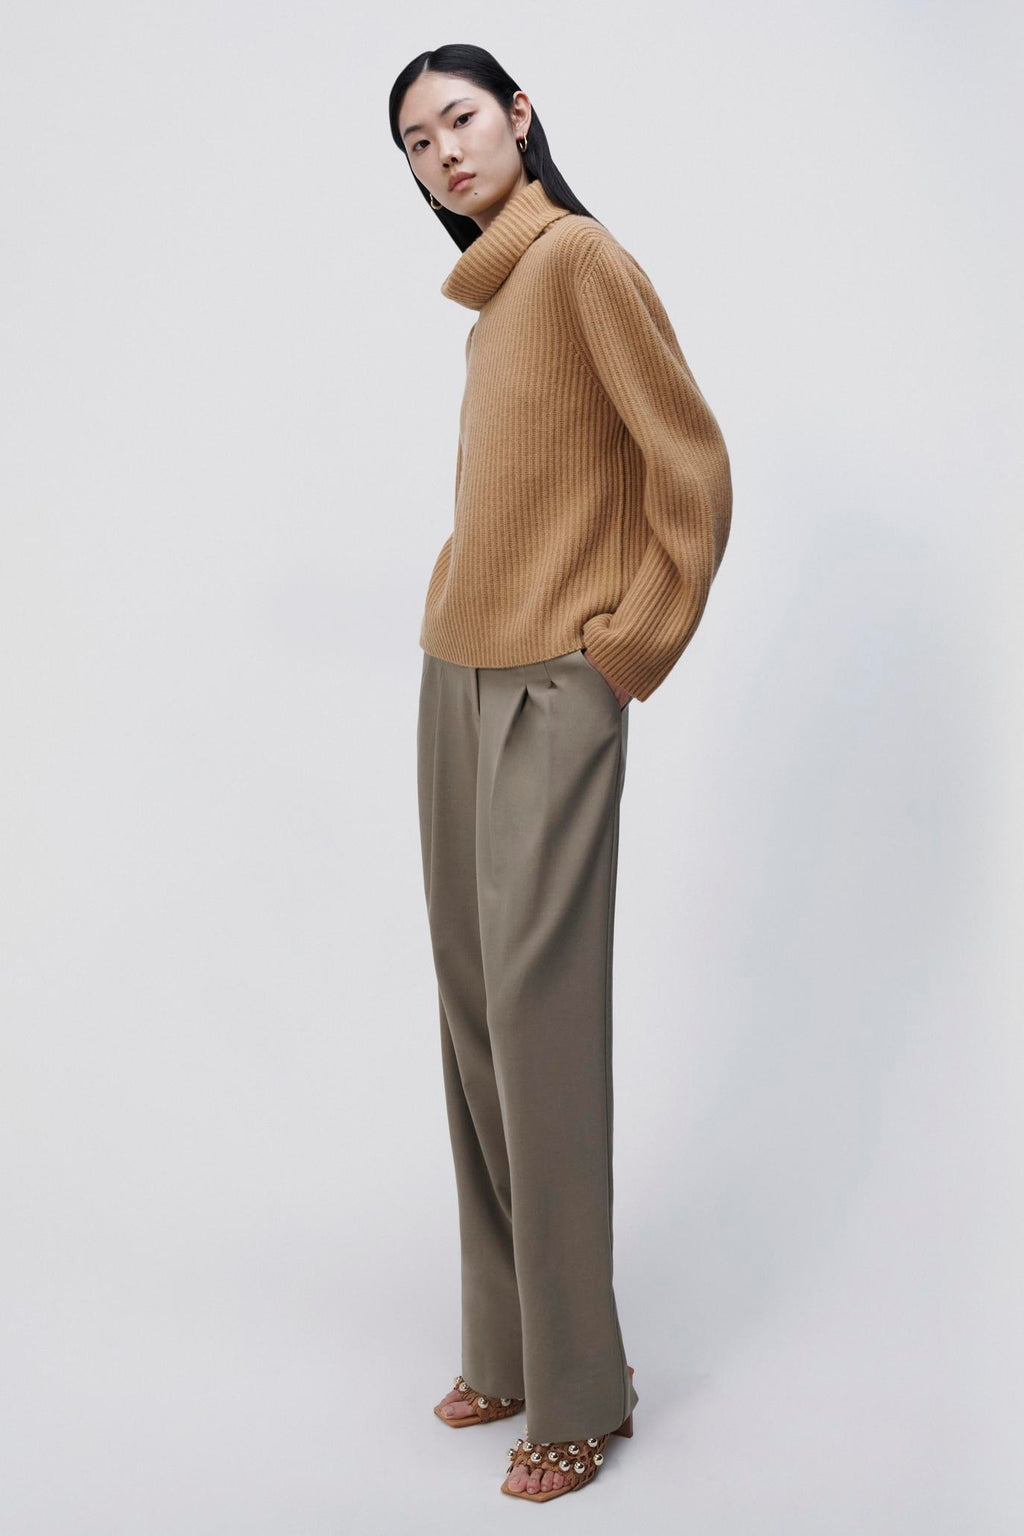 Dustin Recycled Cashmere Turtleneck Pullover